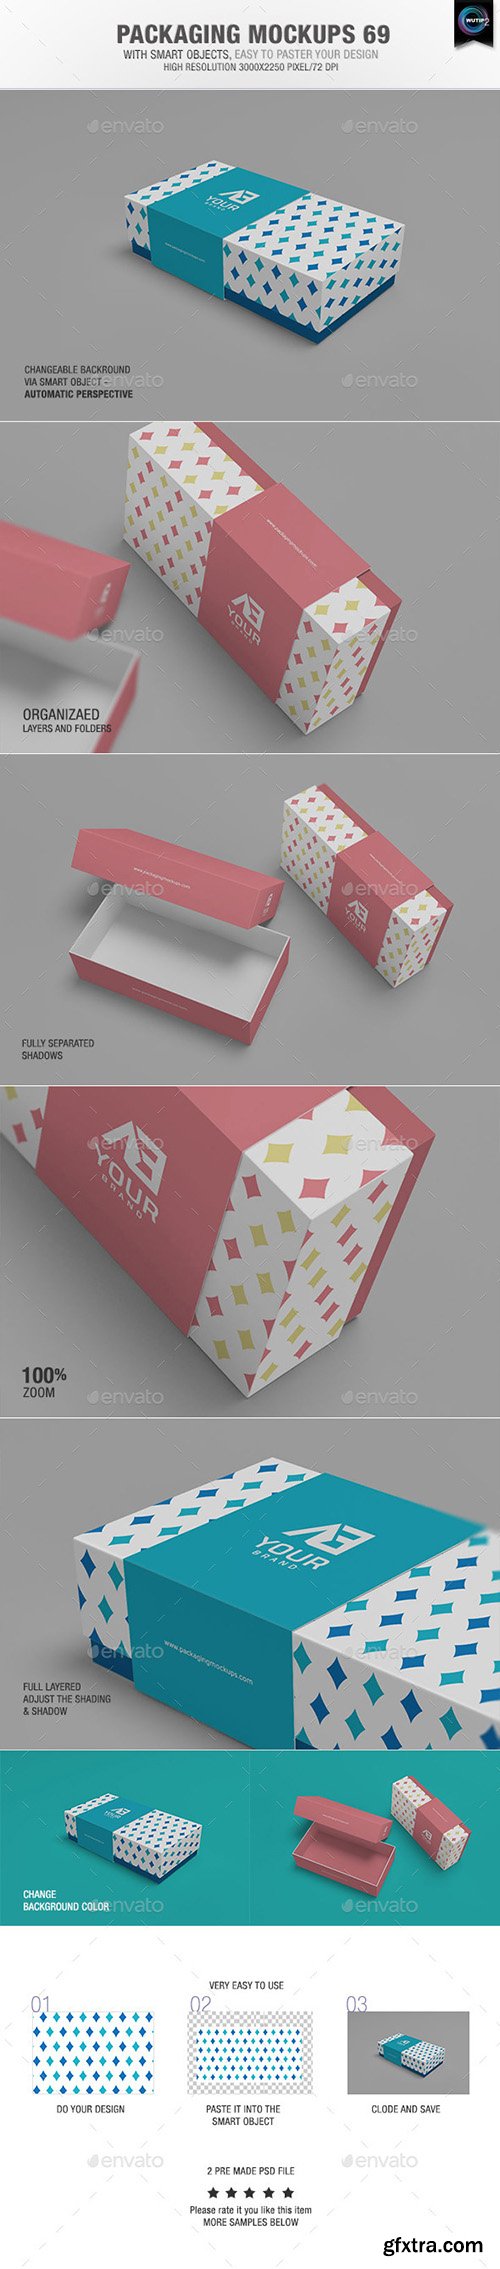 Graphicriver Packaging Mock-ups 69 10063747